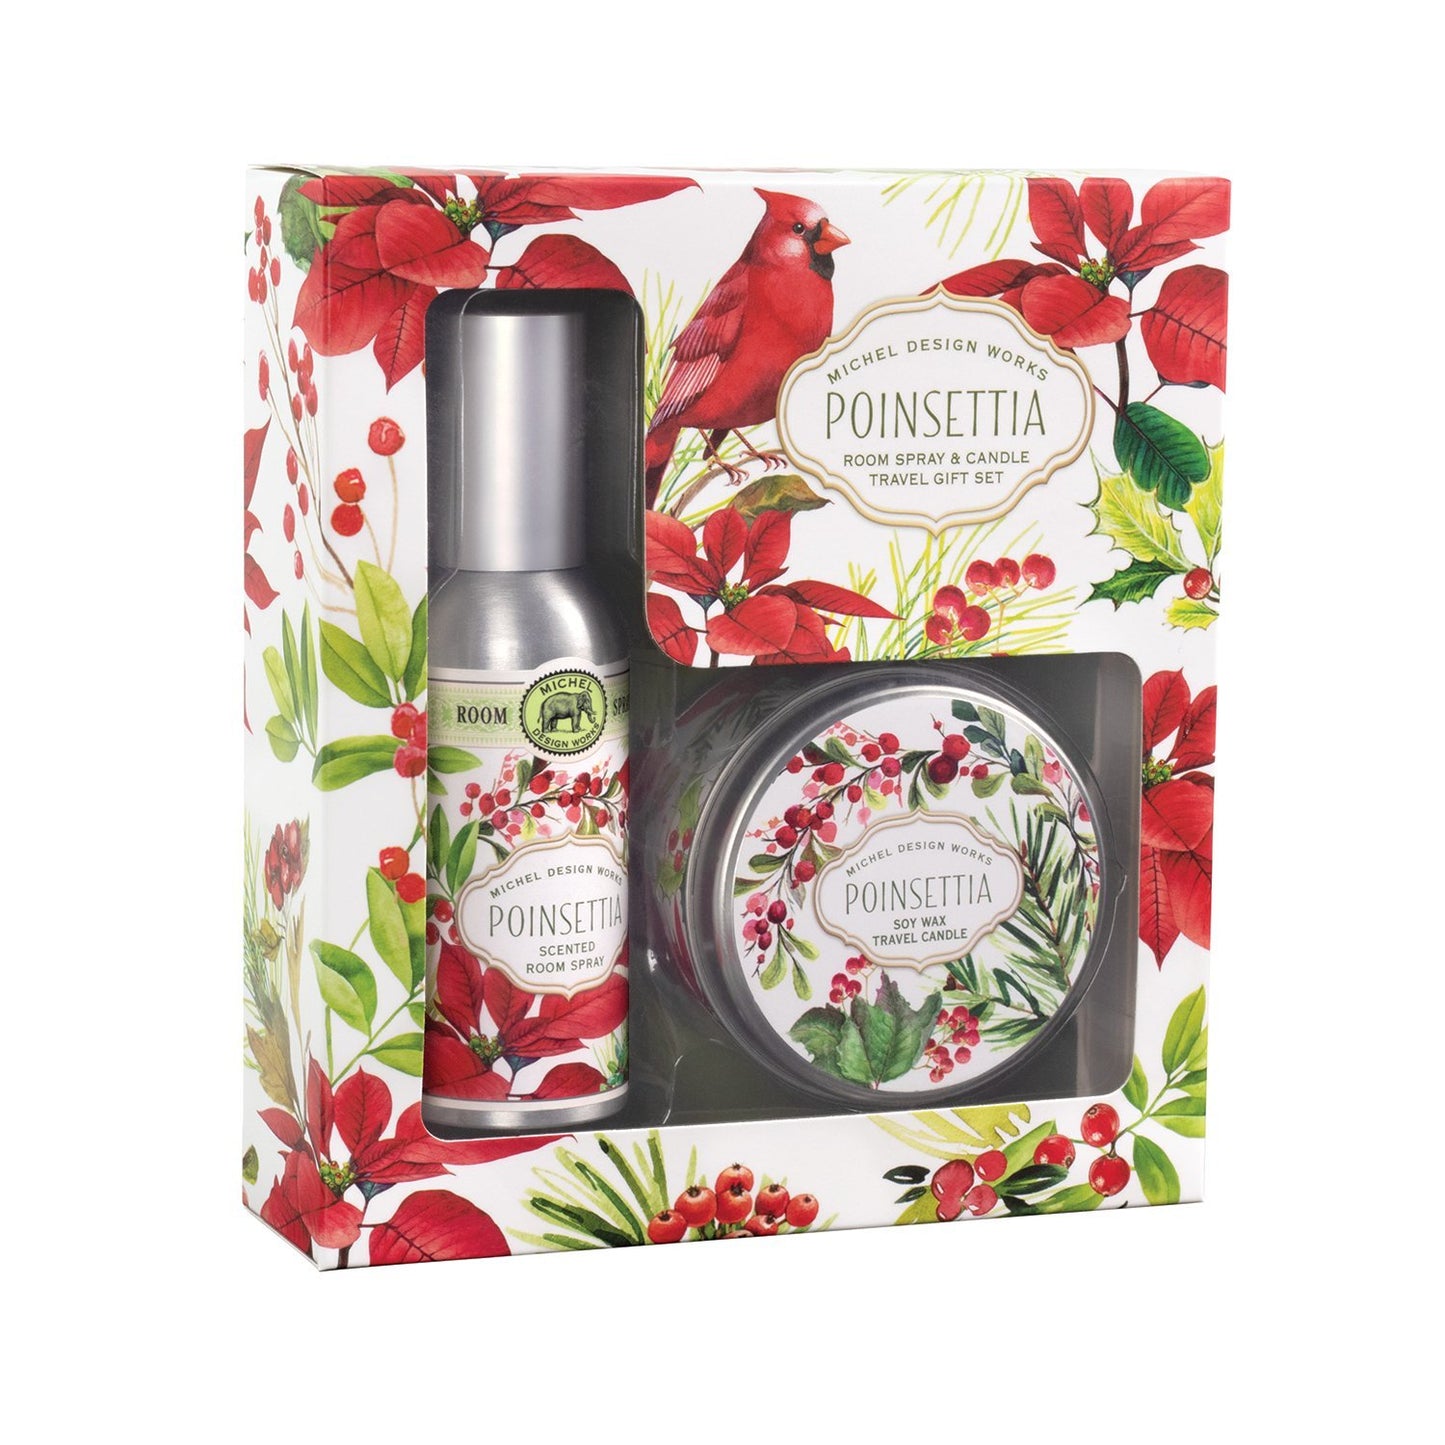 Michel Design Works Poinsettia Room Spray and Candle Travel Gift Set